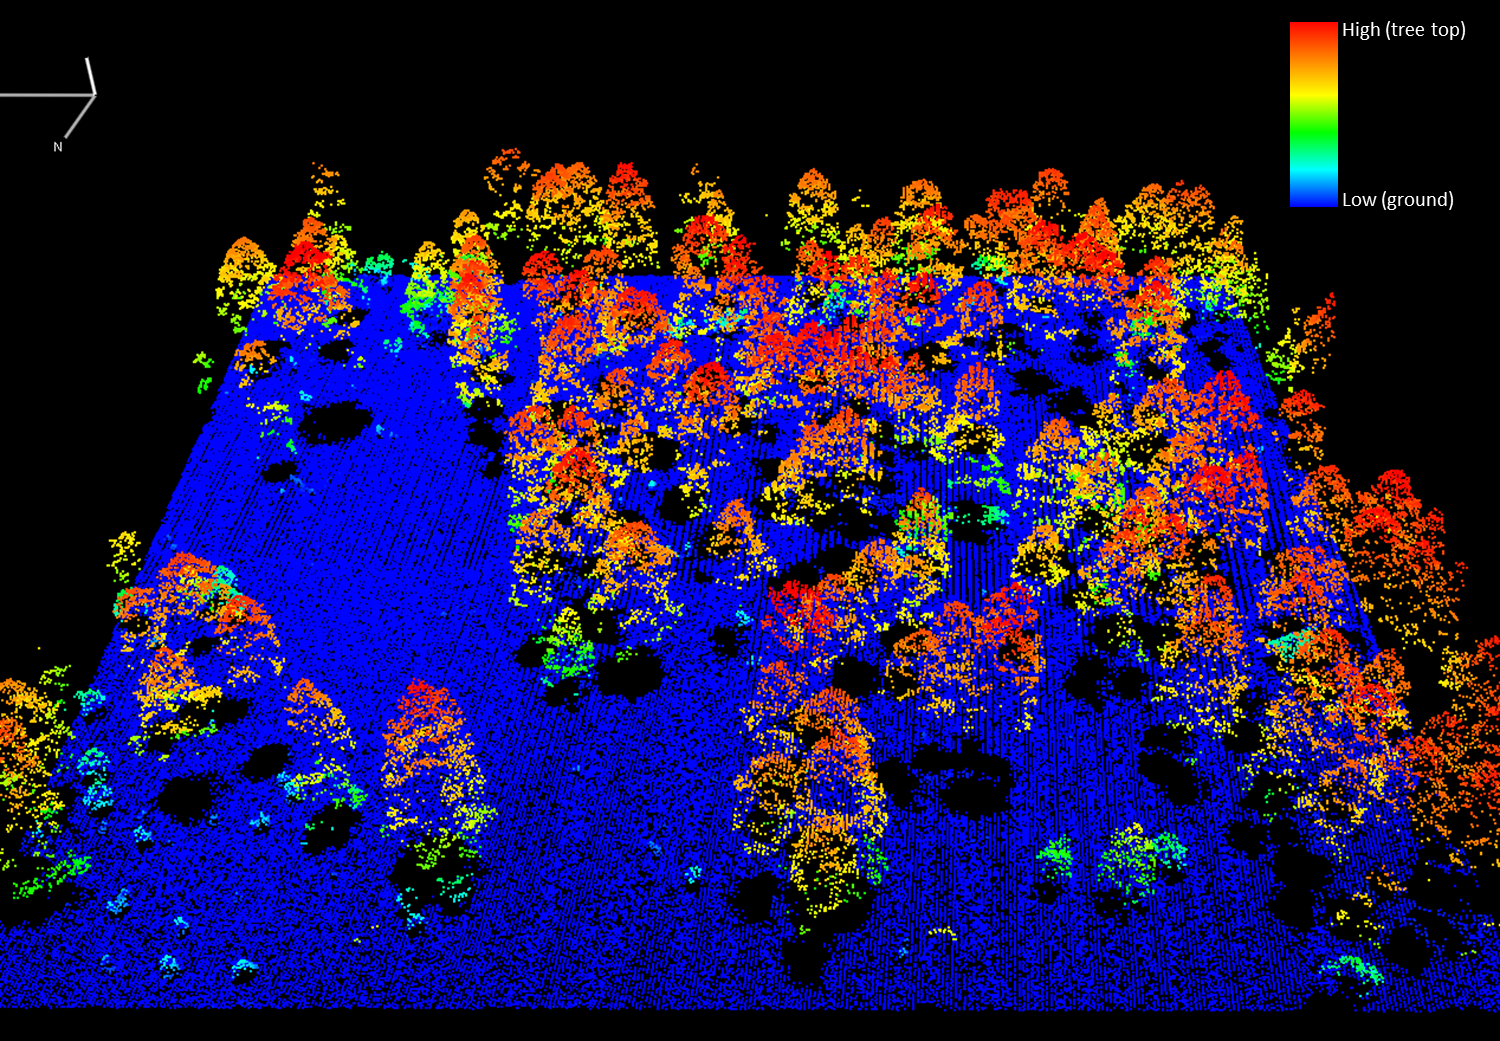 Lidar point cloud of a Ponderosa pine plot on the San Carlos Apache Reservation. Colors reflect  tree height above ground level, from low (cyan) to high (red).